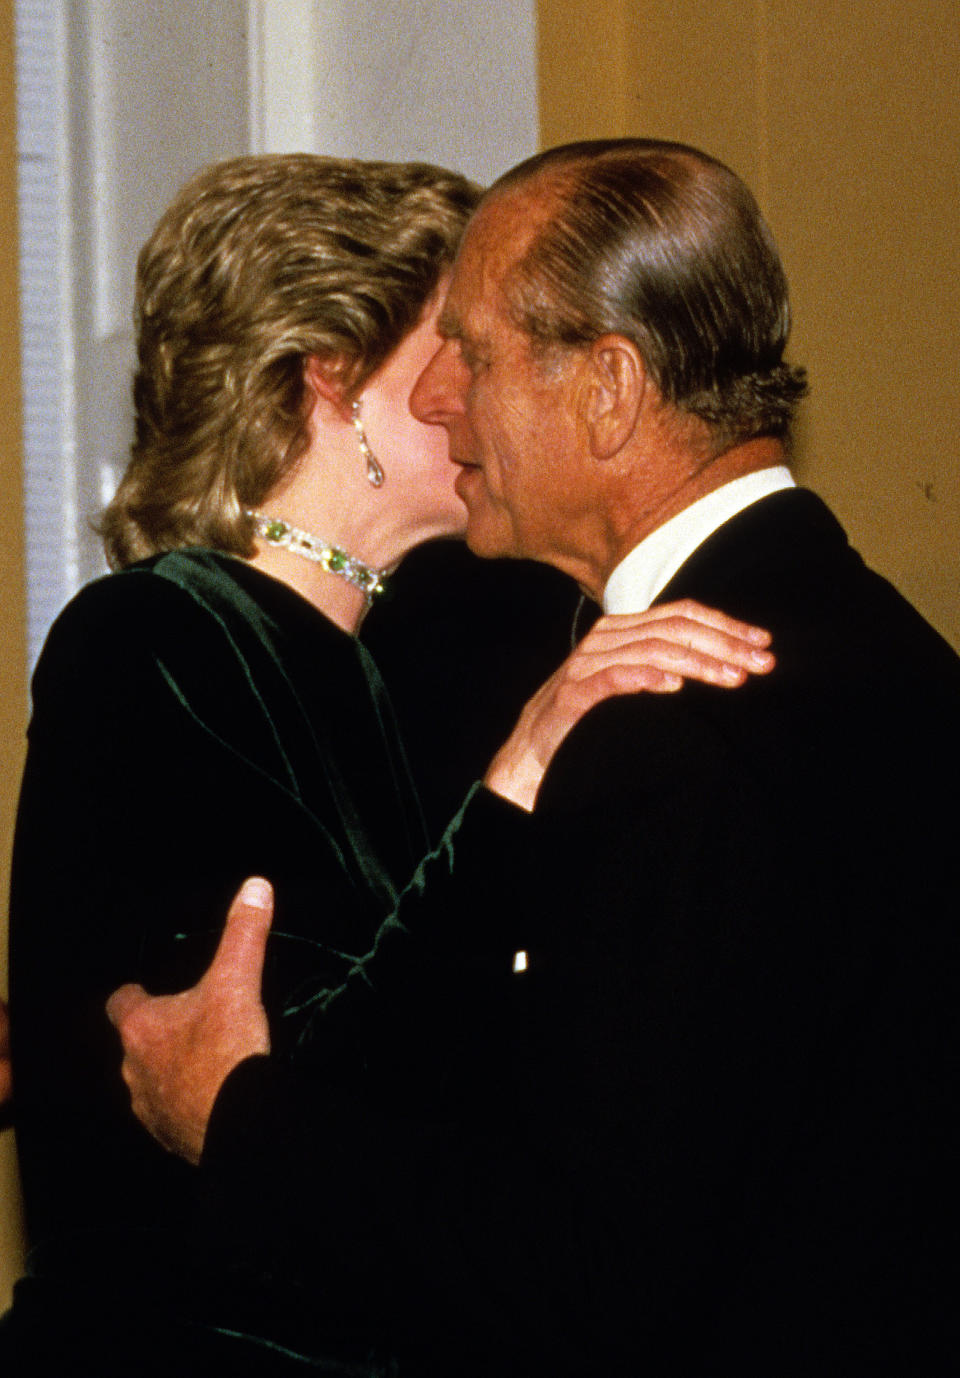 Prince Phillip offered Princess Diana support through a string of letters after he found out about his son’s affair. Source: Getty